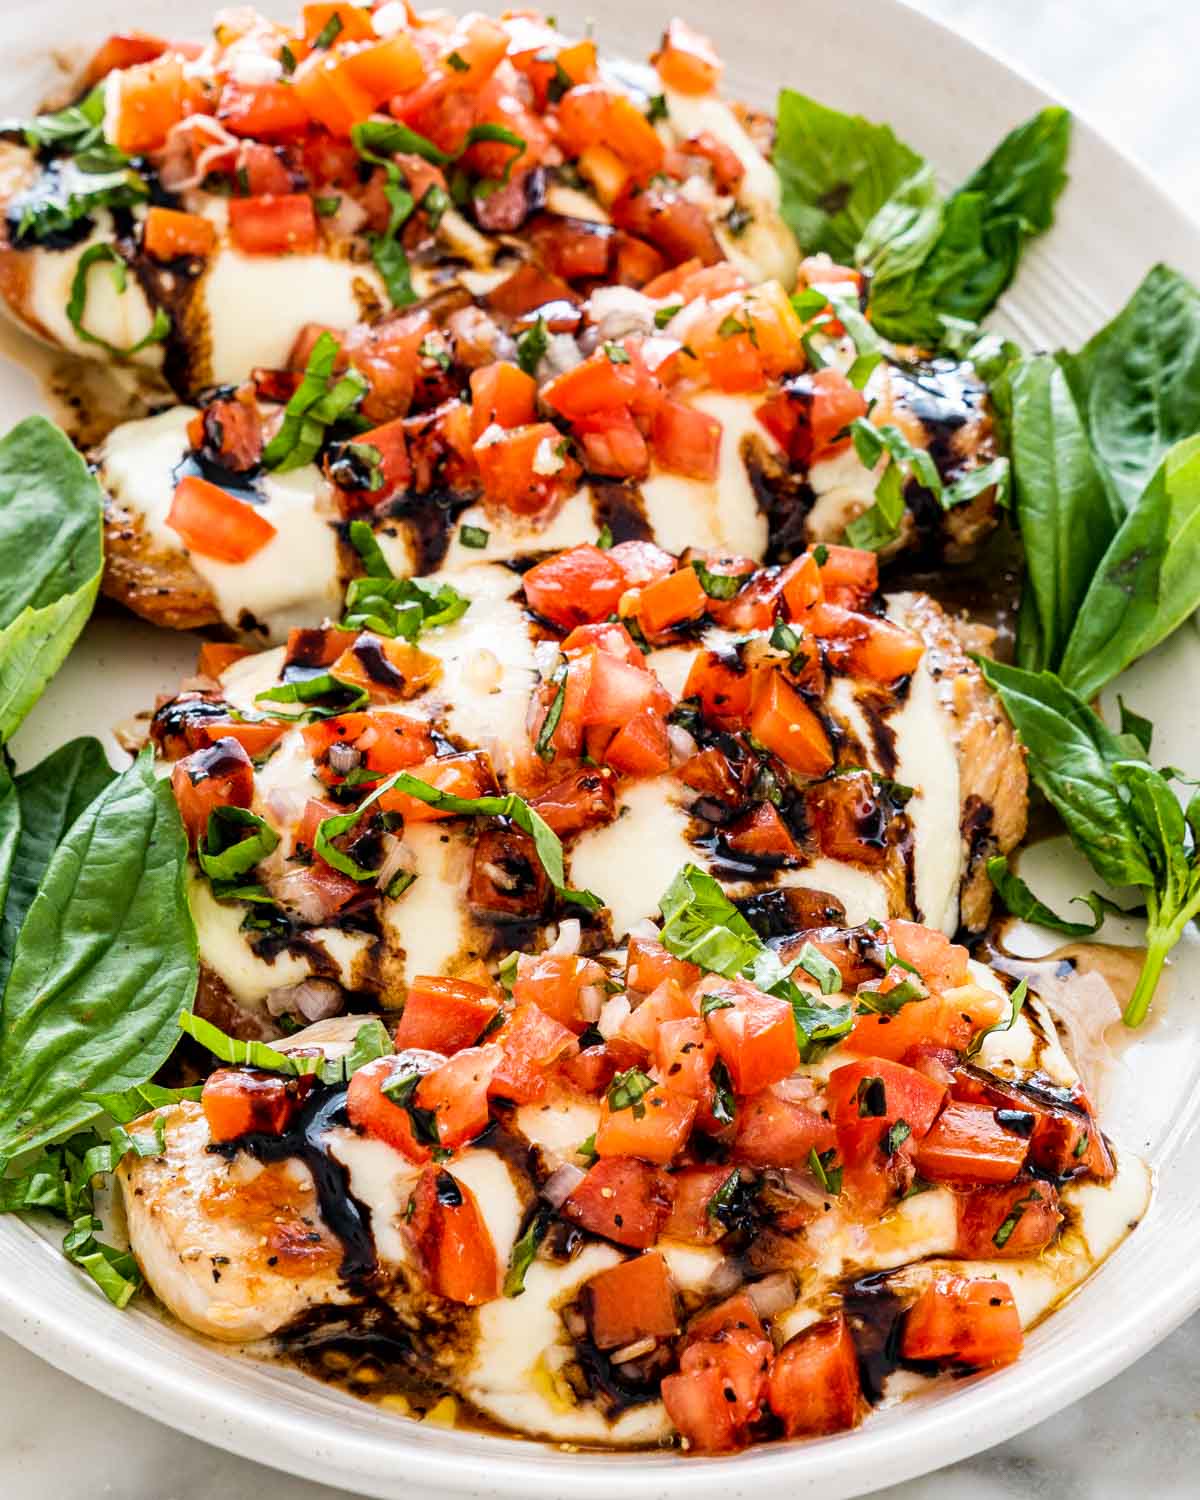 4 pieces of bruschetta pieces garnished with basil leaves on a serving platter